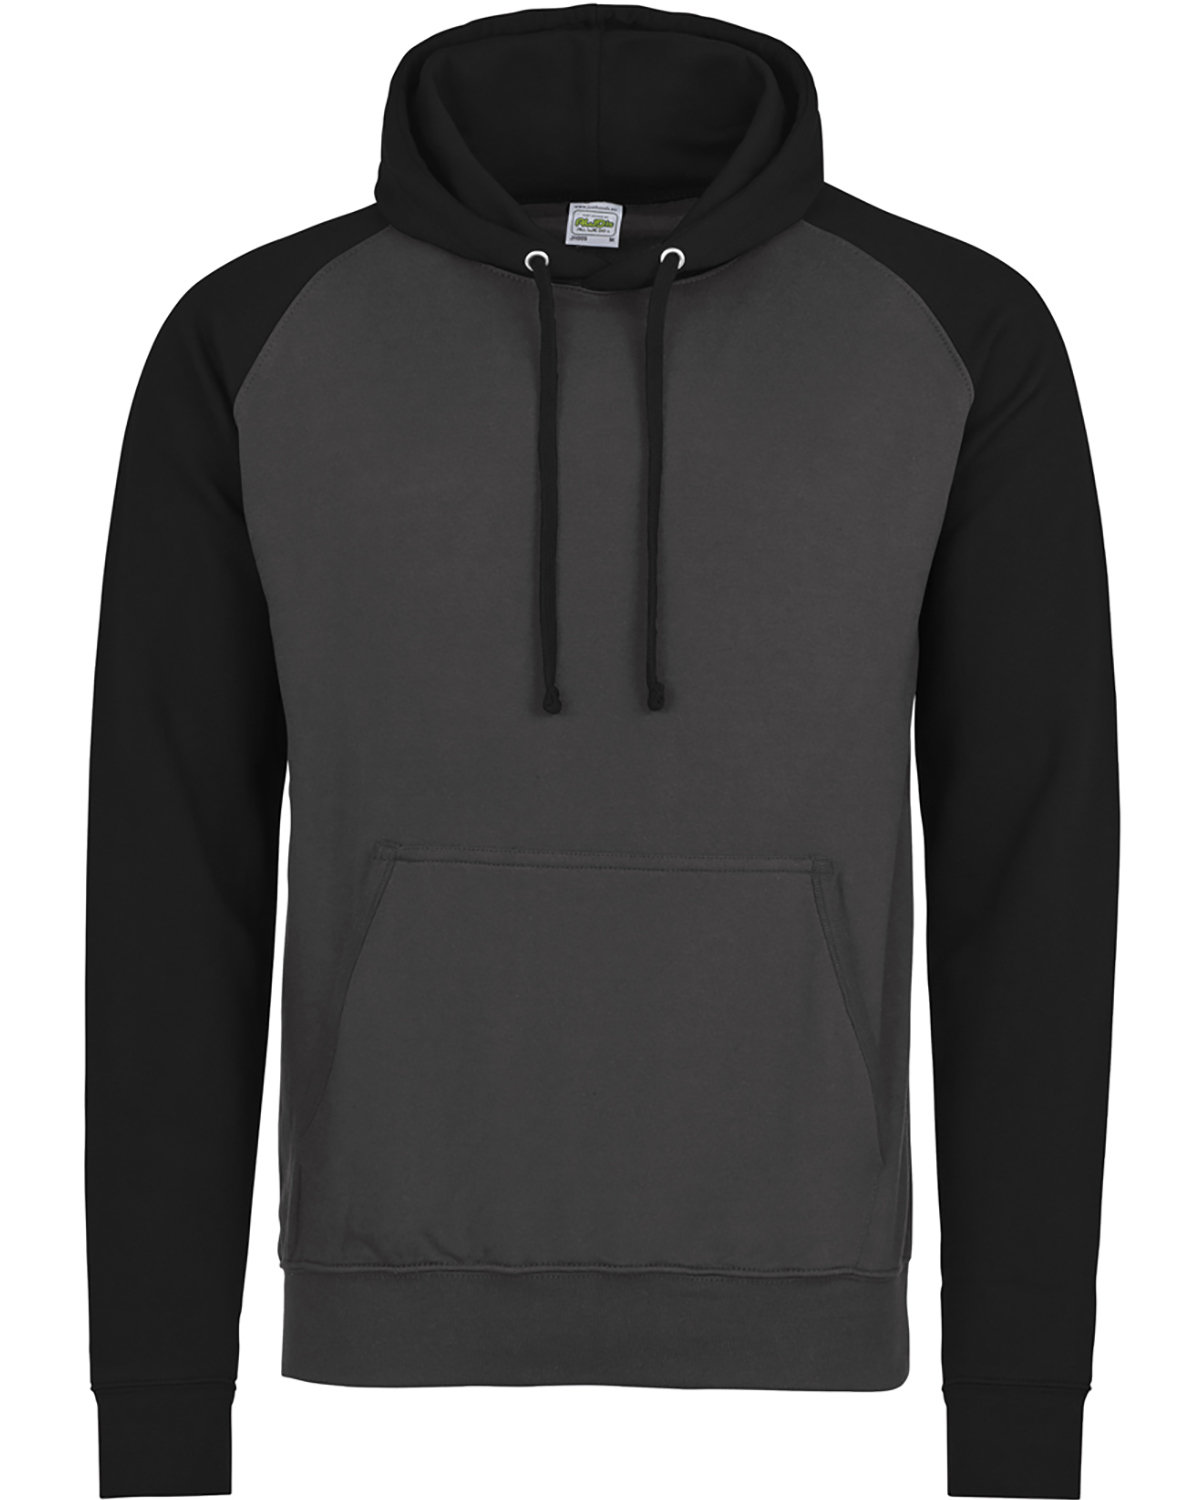 Adult Midweight Contrast Baseball Hooded Sweatshirt-Just Hoods By AWDis